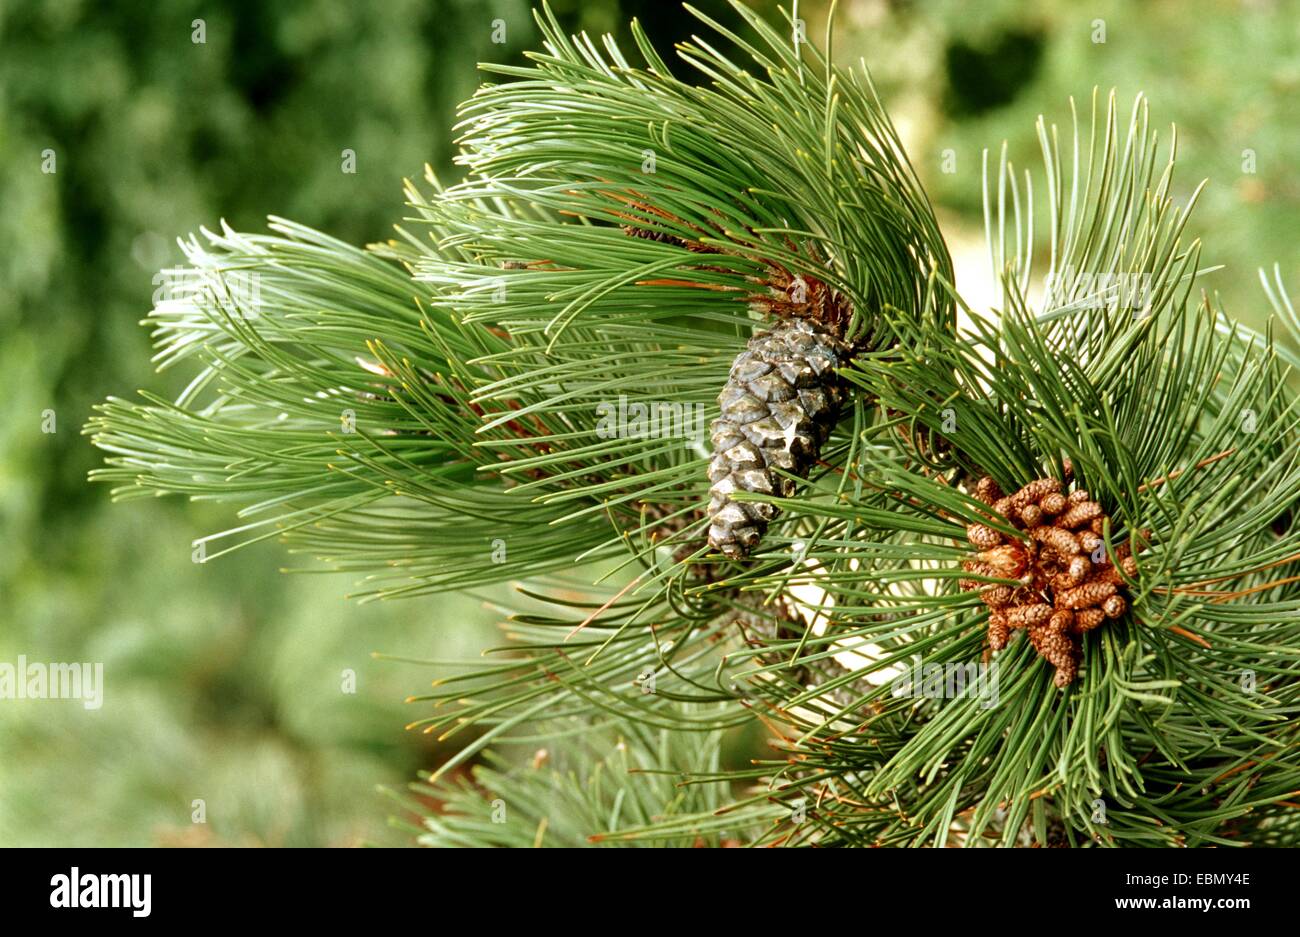 Bosnian Pine, Palebark Pine (Pinus leucodermis), branch with cones with male inflorescence Stock Photo